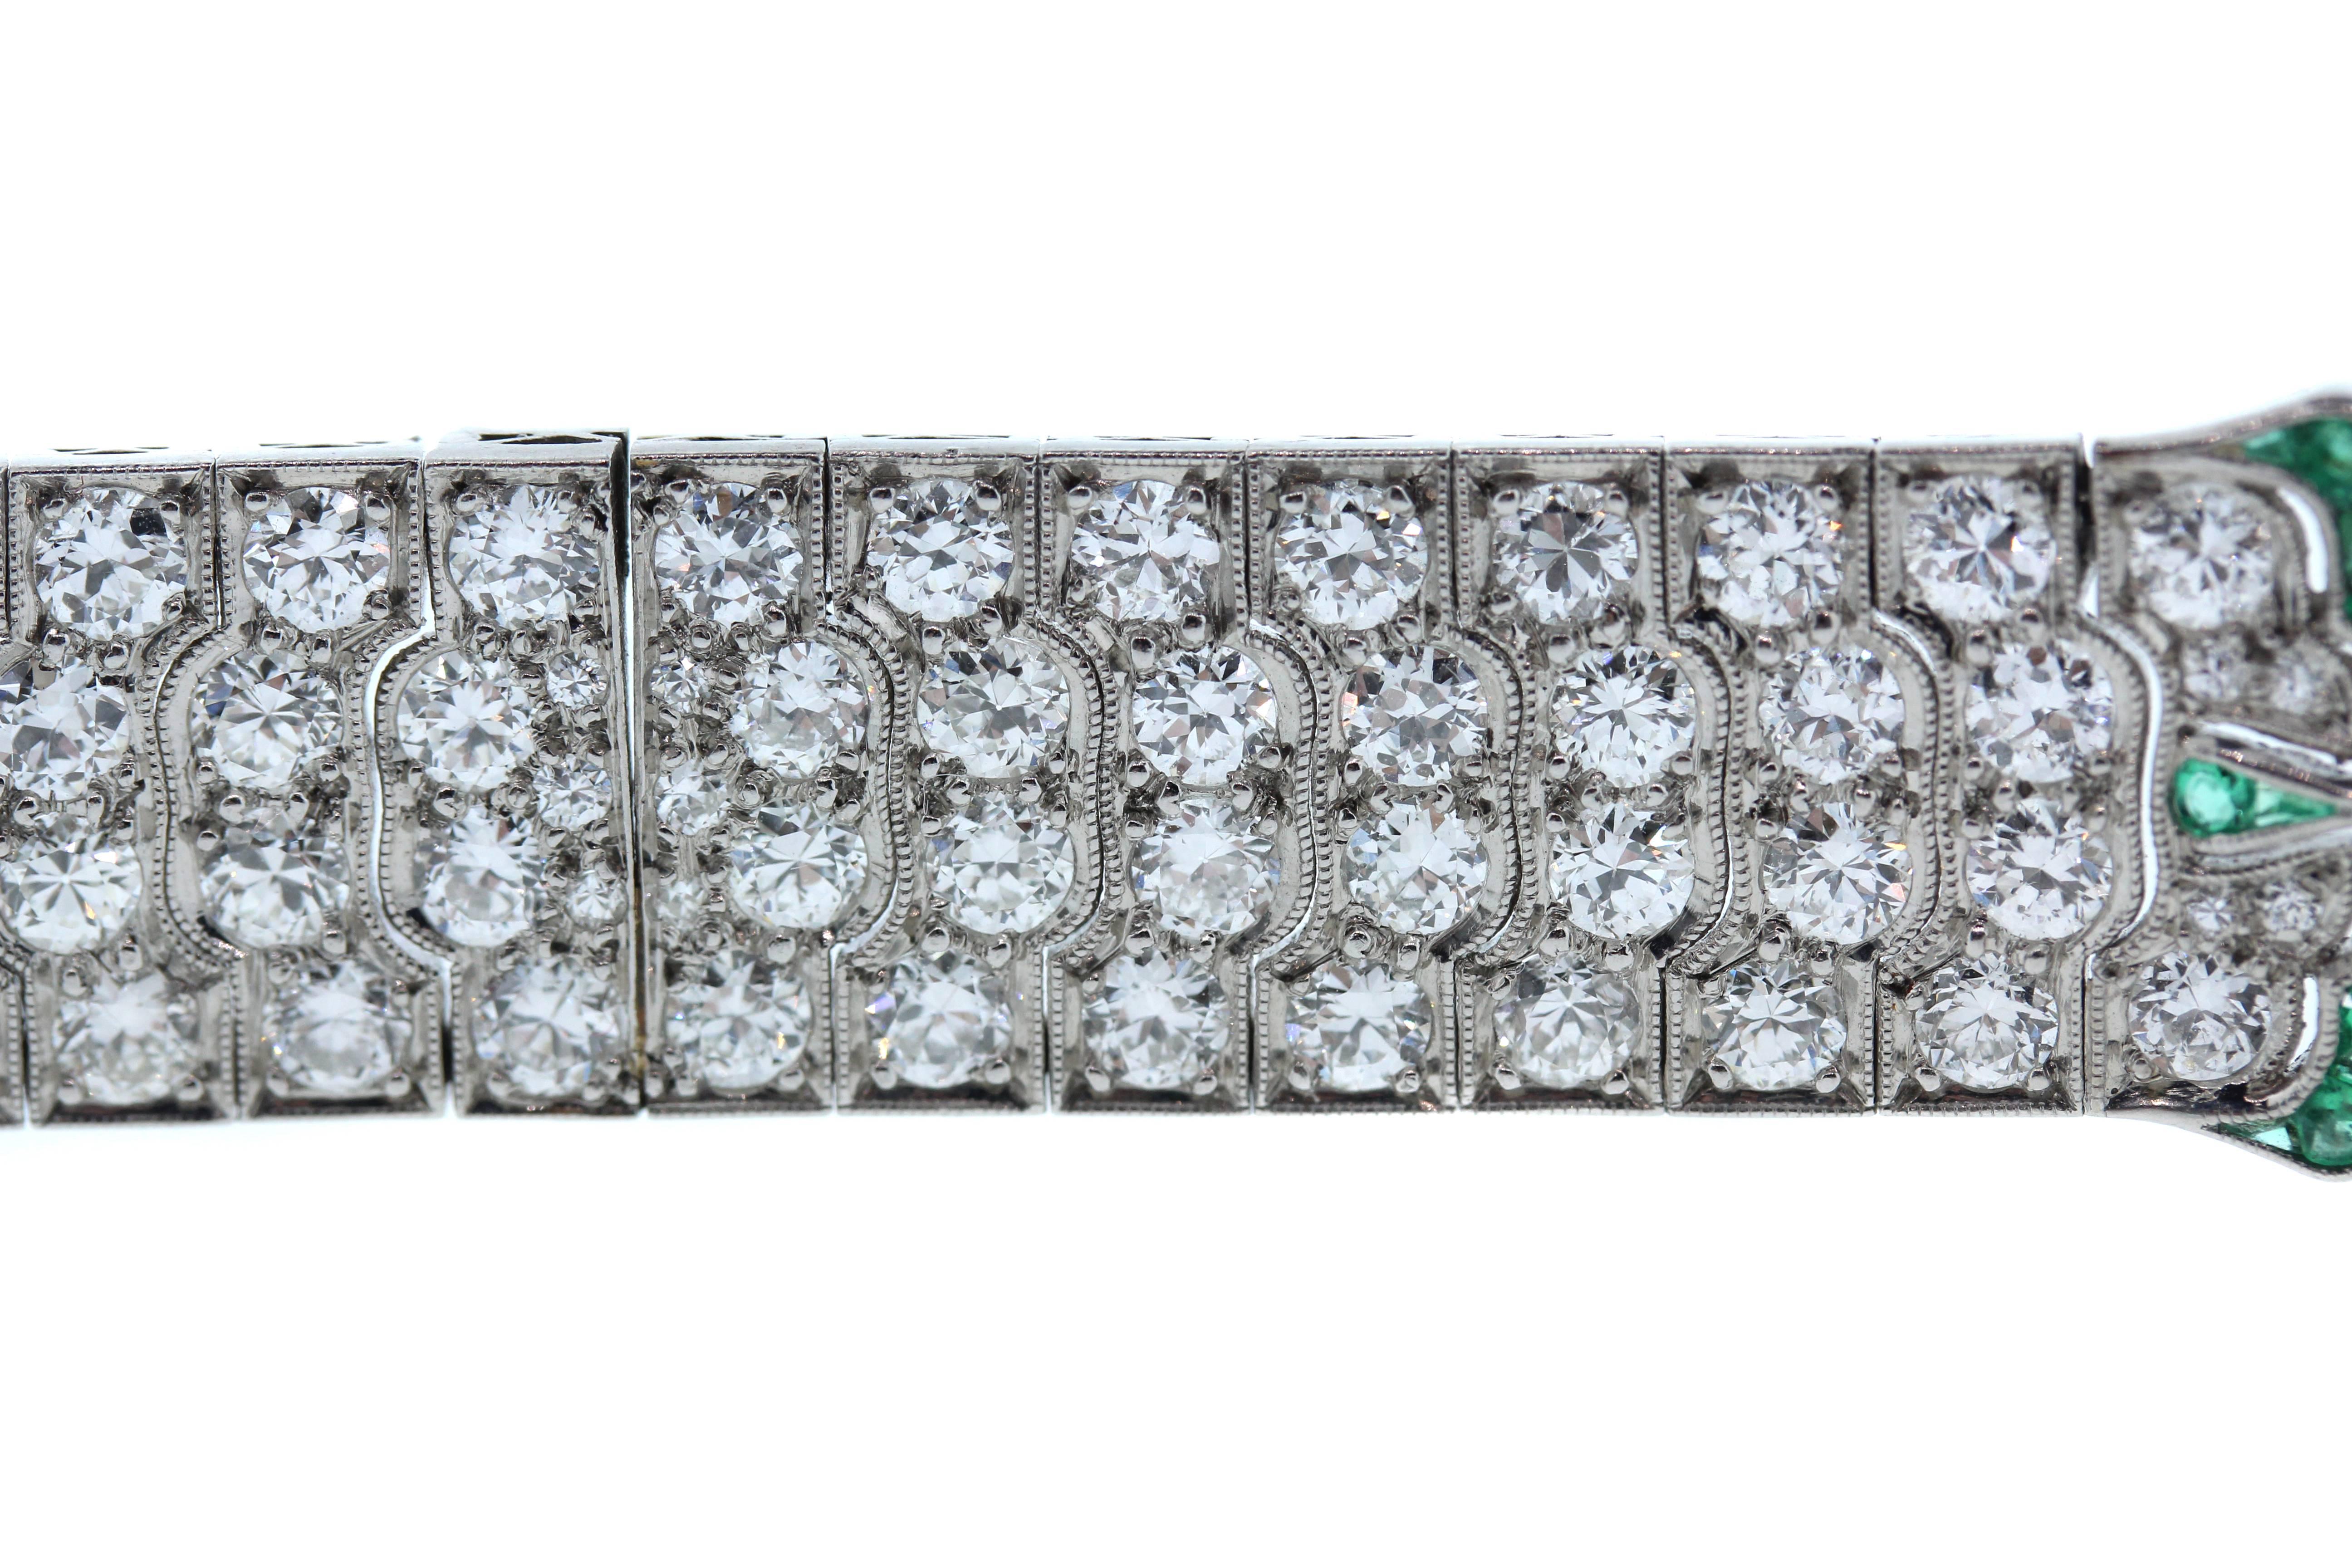 Art Deco Platinum Bracelet with Diamonds and touch of Emeralds

Apprx. 19.00ct. Diamonds cover entire bracelet

Tiny touch of emeralds on both sides of bracelet. 

6.5 inches length x 0.5 inch wide

Estate
